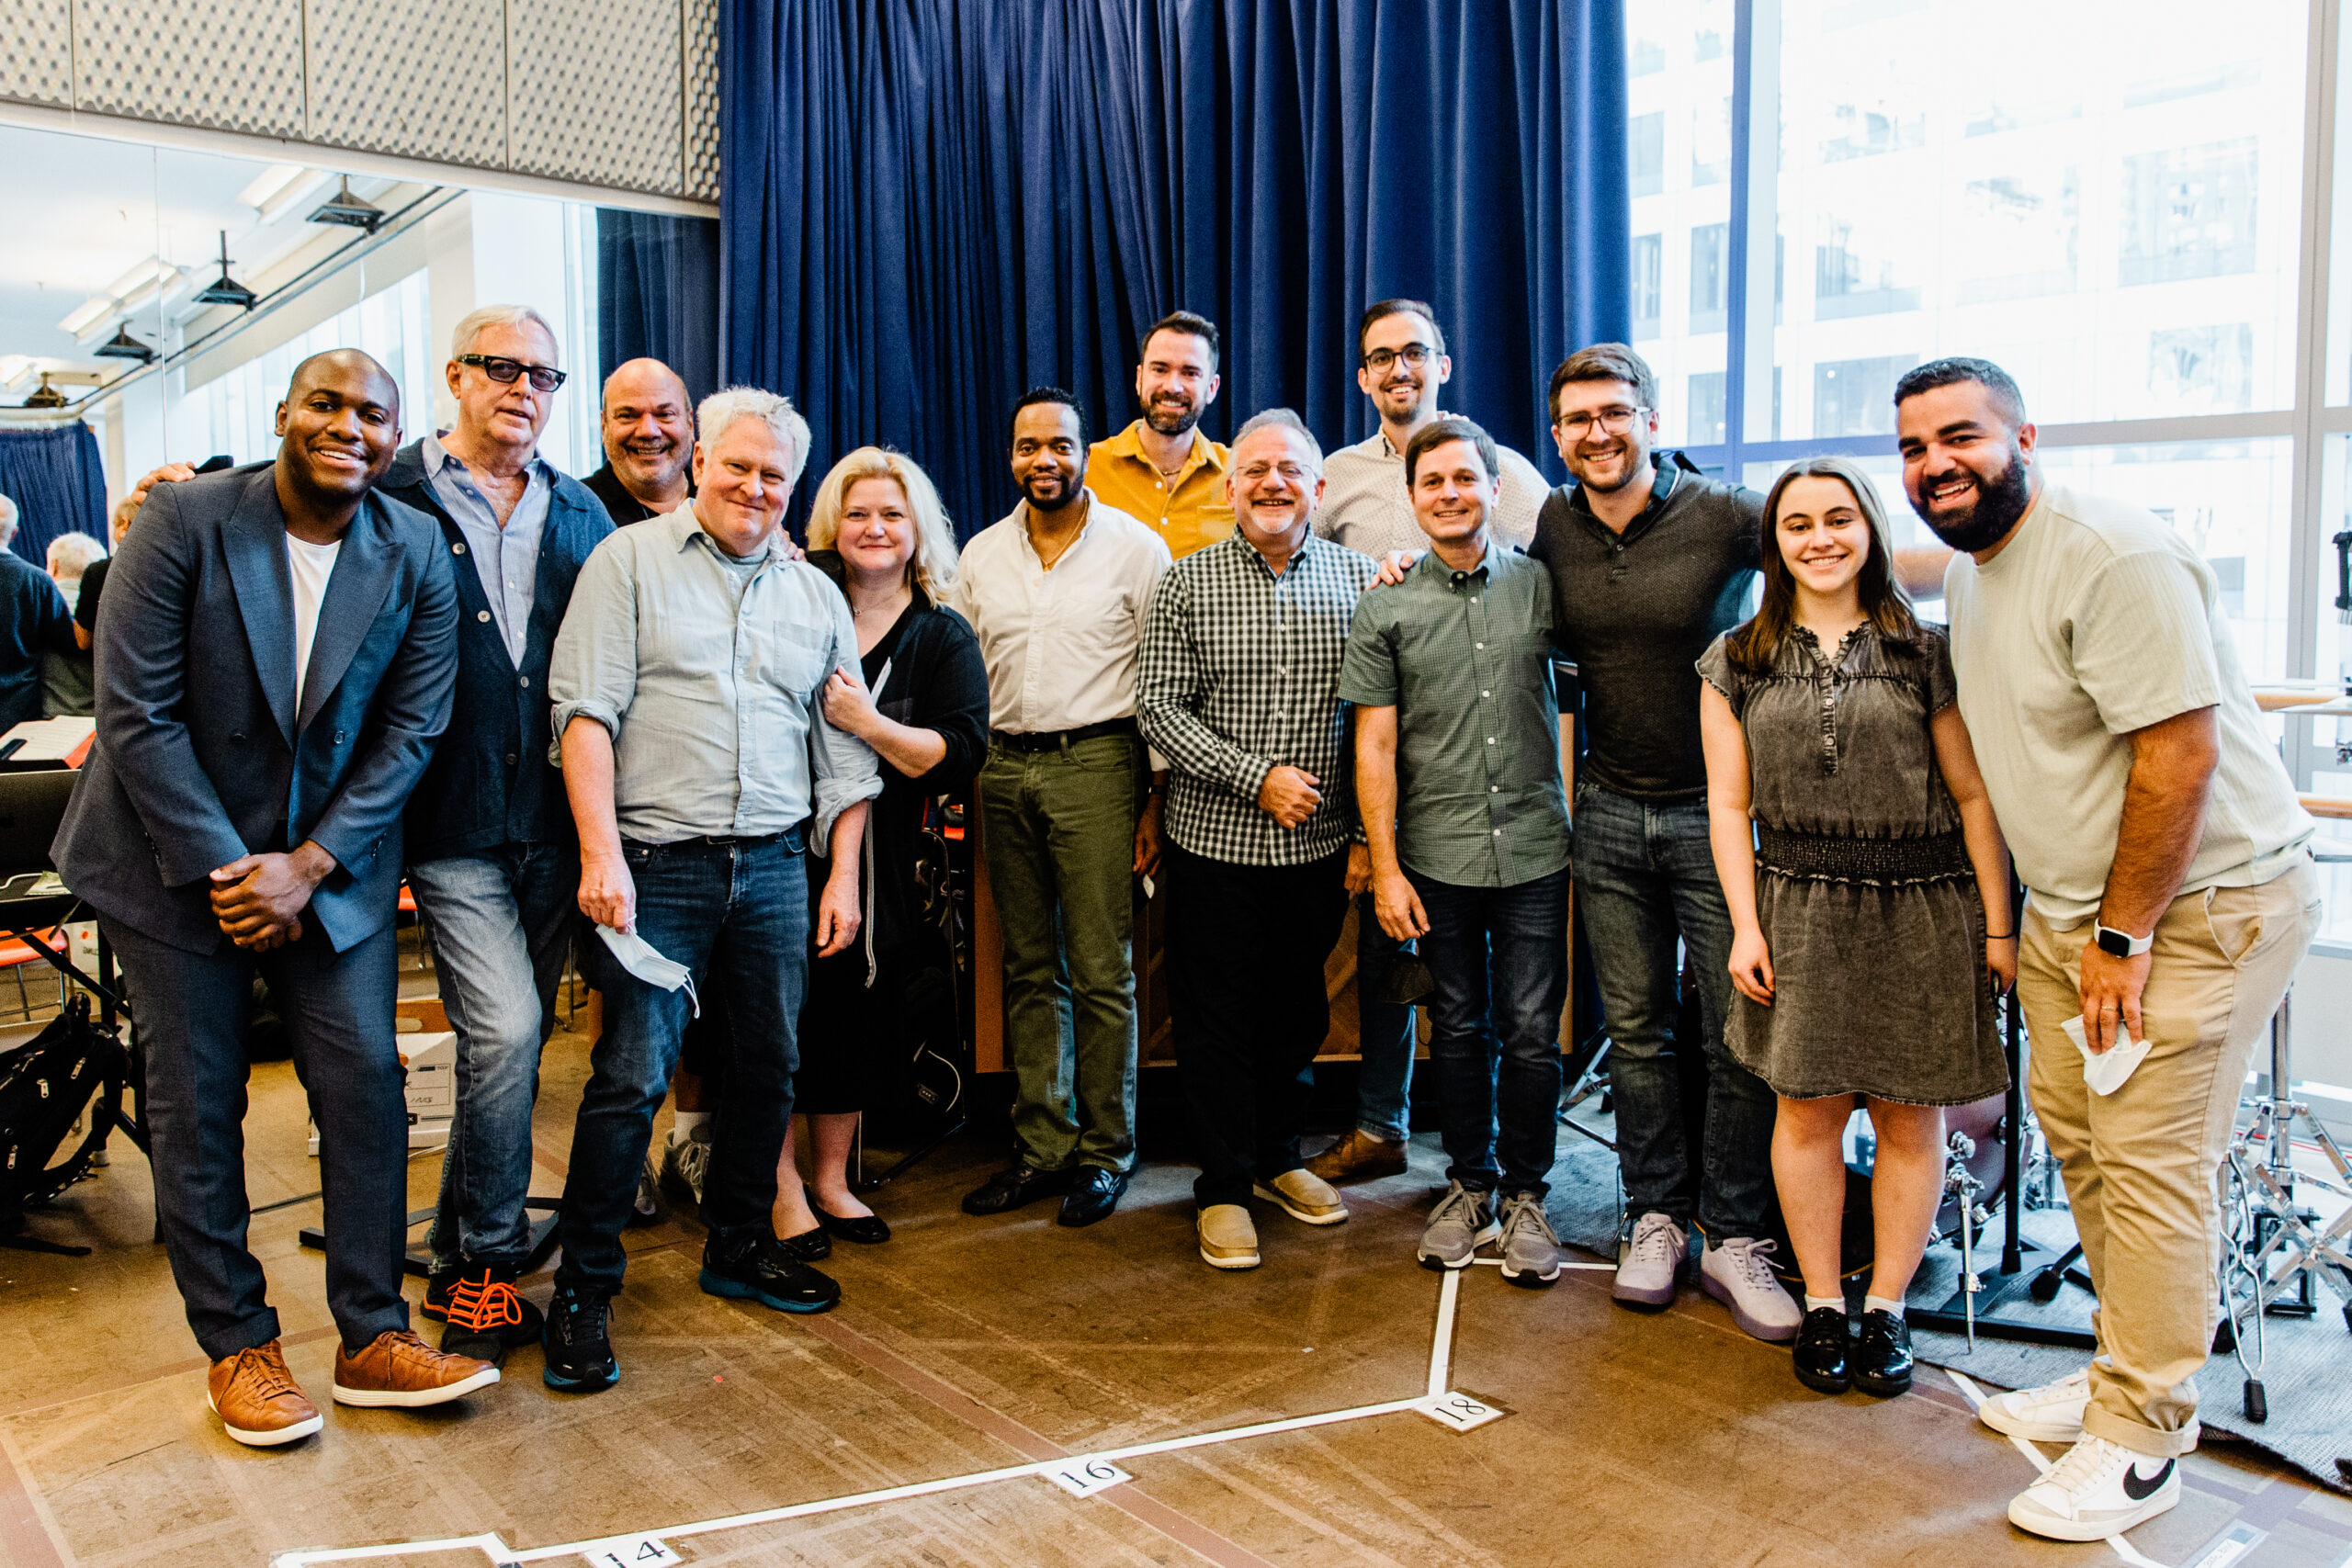 The music team for Some Like It Hot. Photo by Marc J. Franklin.